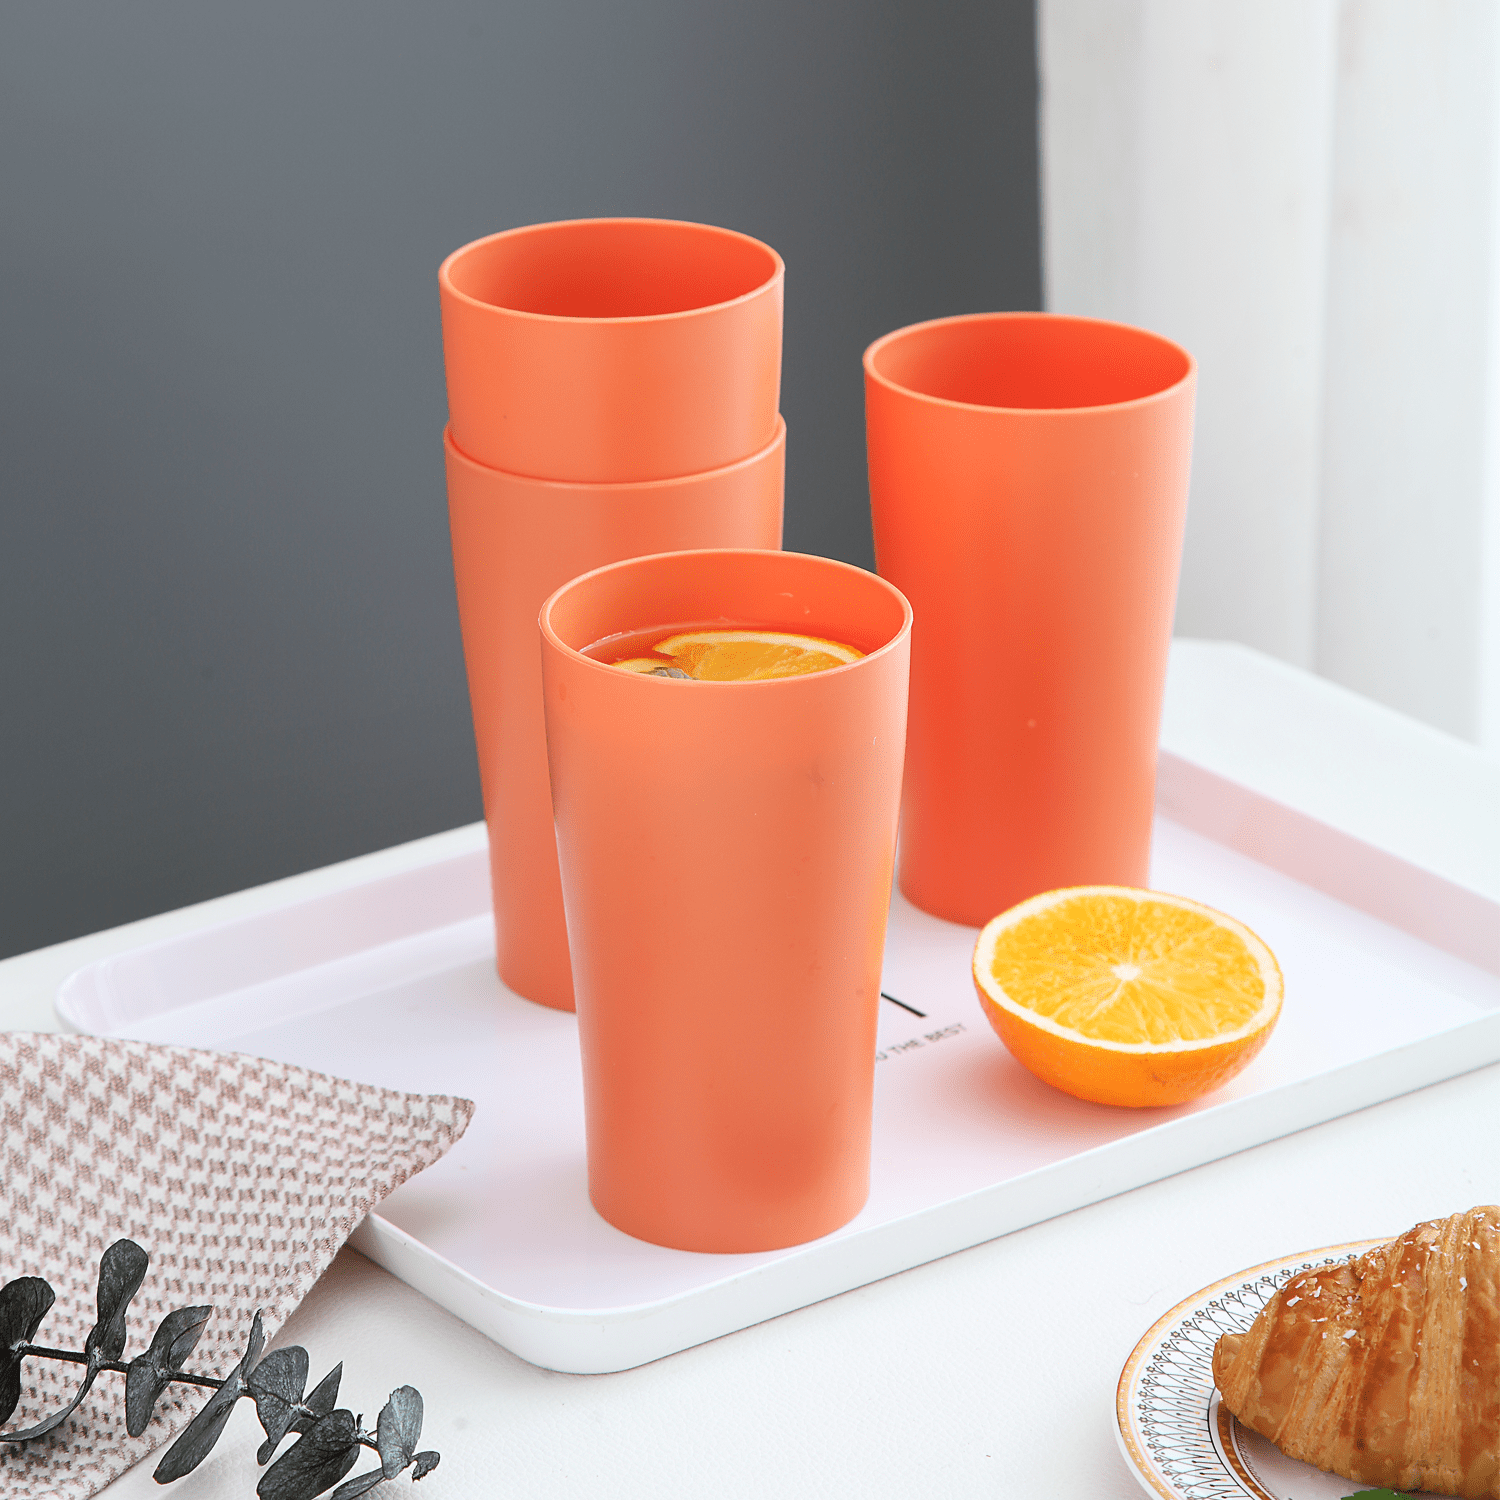 8PCS Plastic Cups Reusable Unbreakable Water Drinking Cup,Toiletry